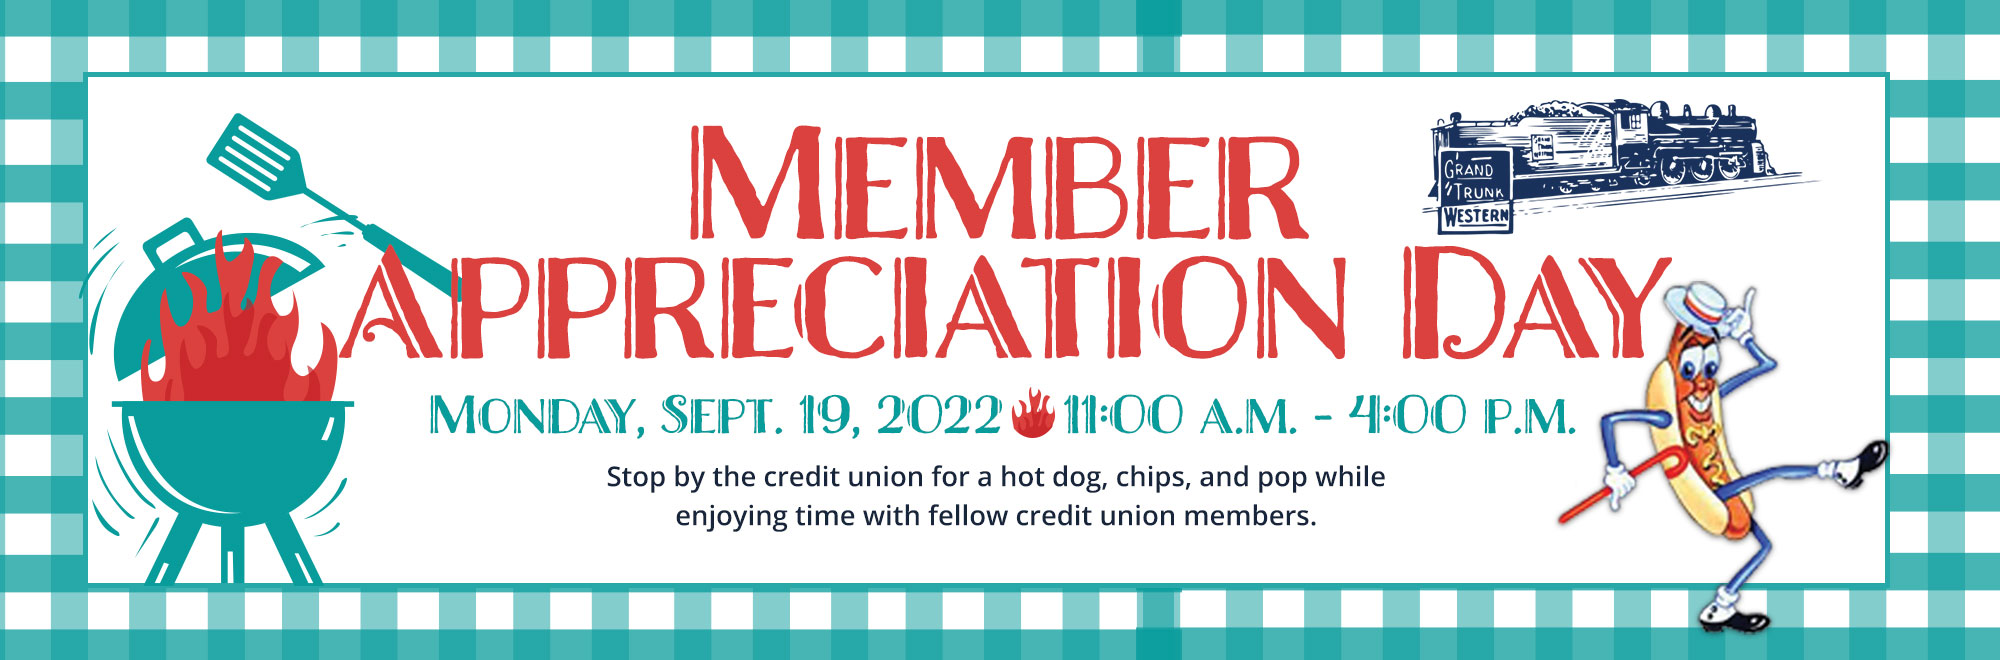 Member Appreciation Day. Monday, September 19, 2022. 11:00 a.m. to 4 p.m. Stop by the credit union for a hot dog, chips, and a pop while enjoying time with fellow credit union members.